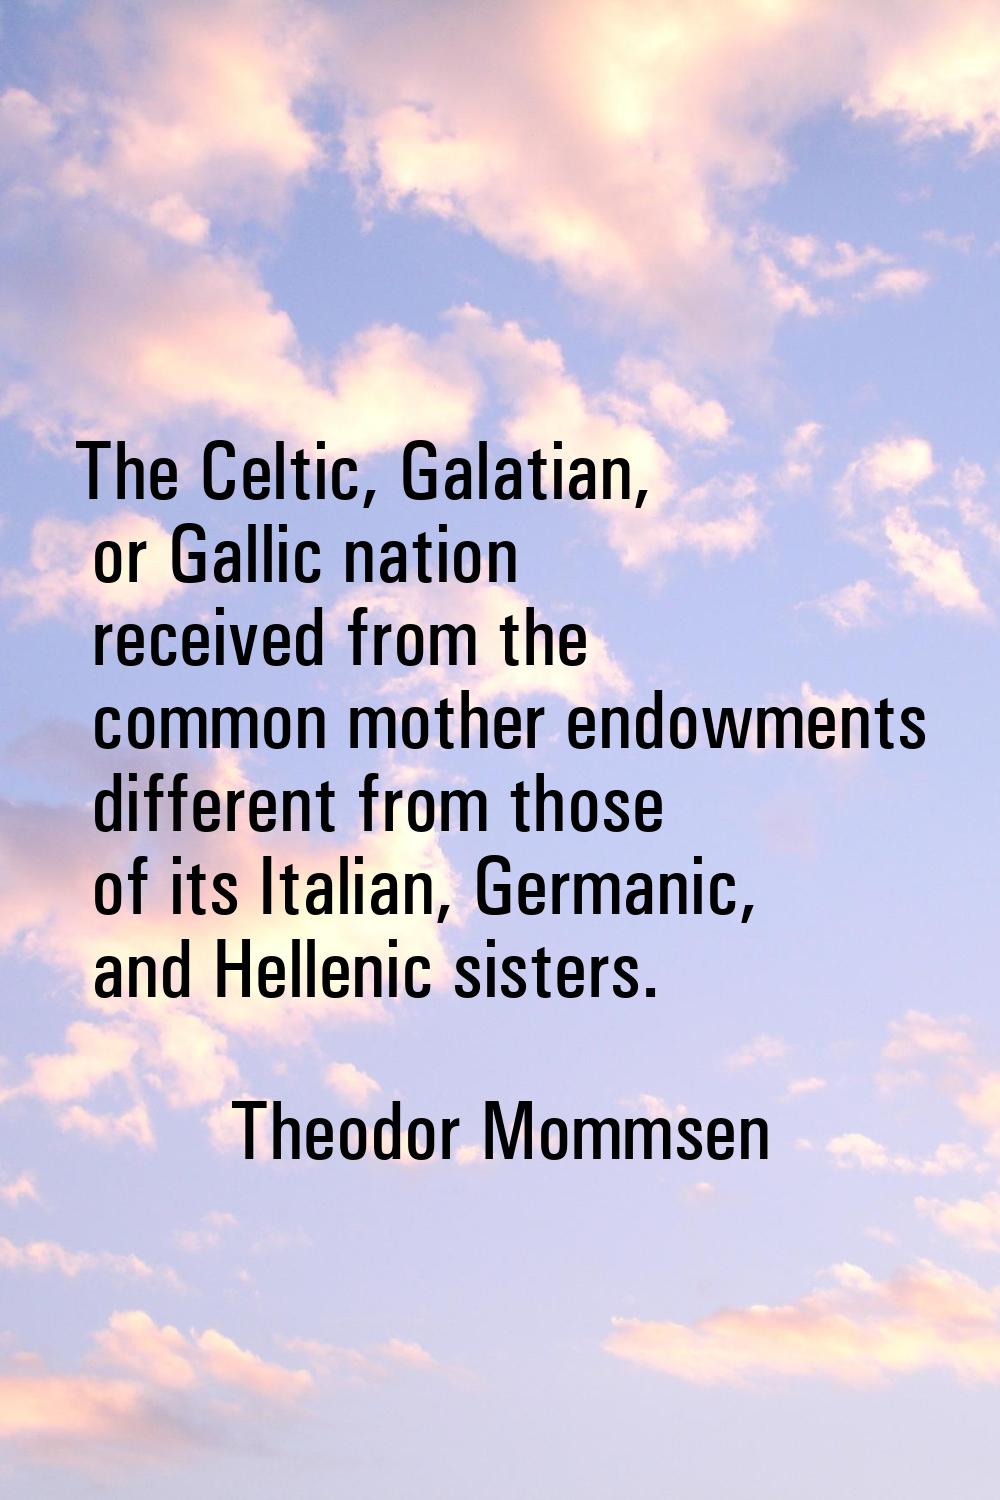 The Celtic, Galatian, or Gallic nation received from the common mother endowments different from th